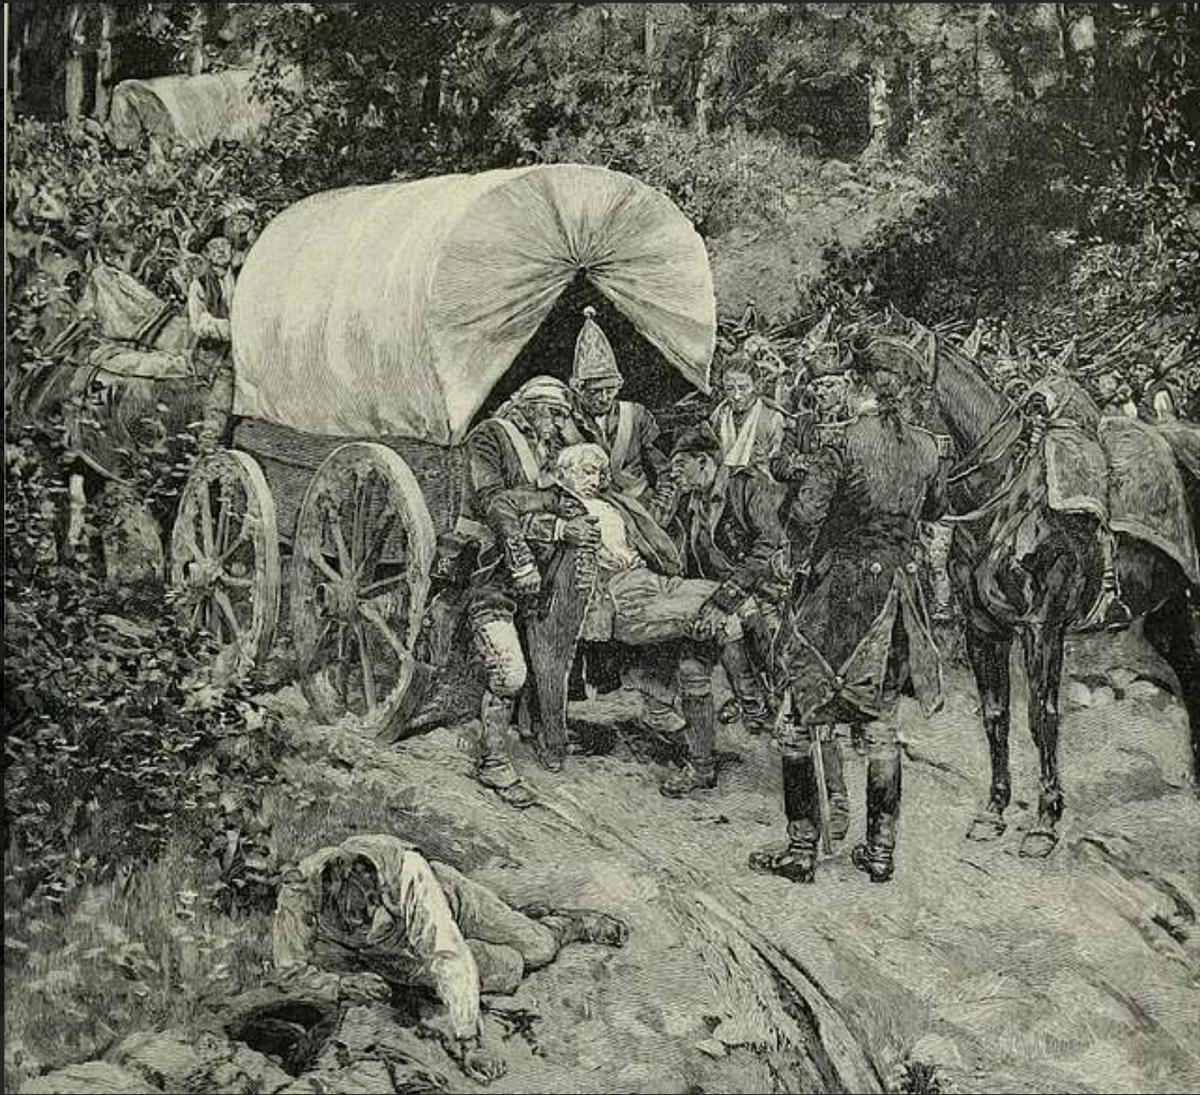 “The Death of Braddock. G.W. Placed the General in a Small Covered Cart” by Howard Pyle and engraved by C.W. Chadwick, 1893. (Public Domain)